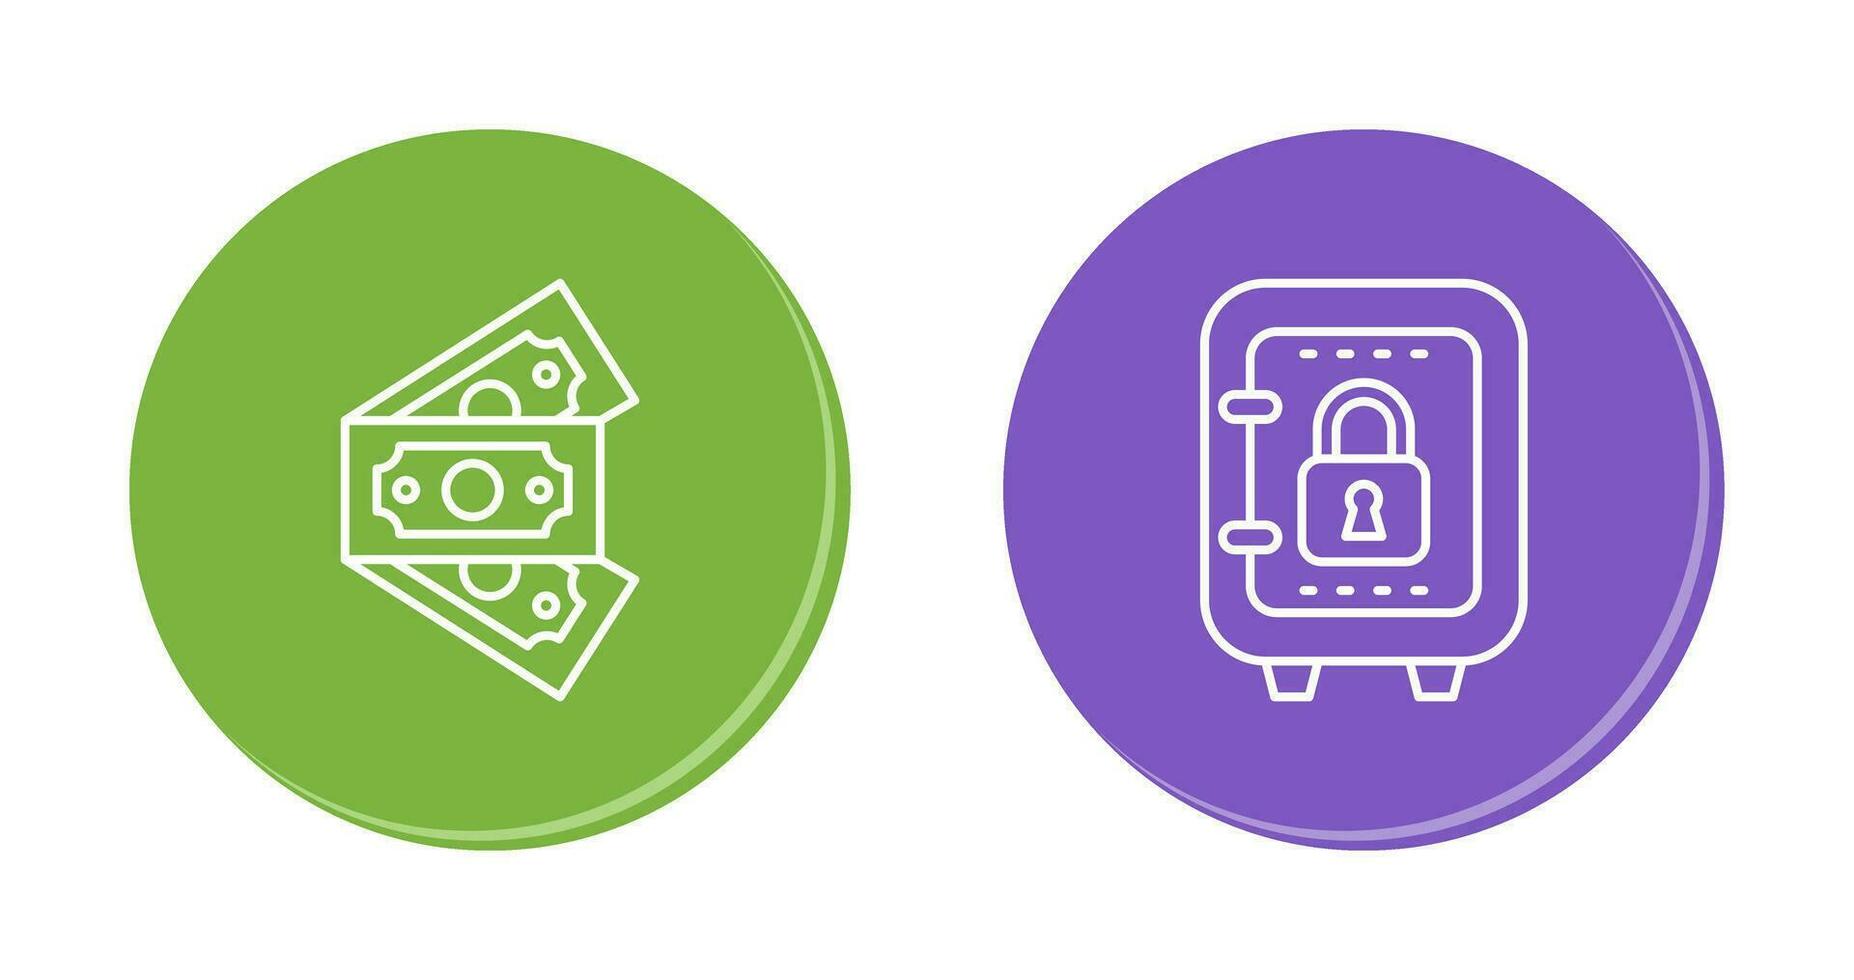 Money and Safe Box Icon vector